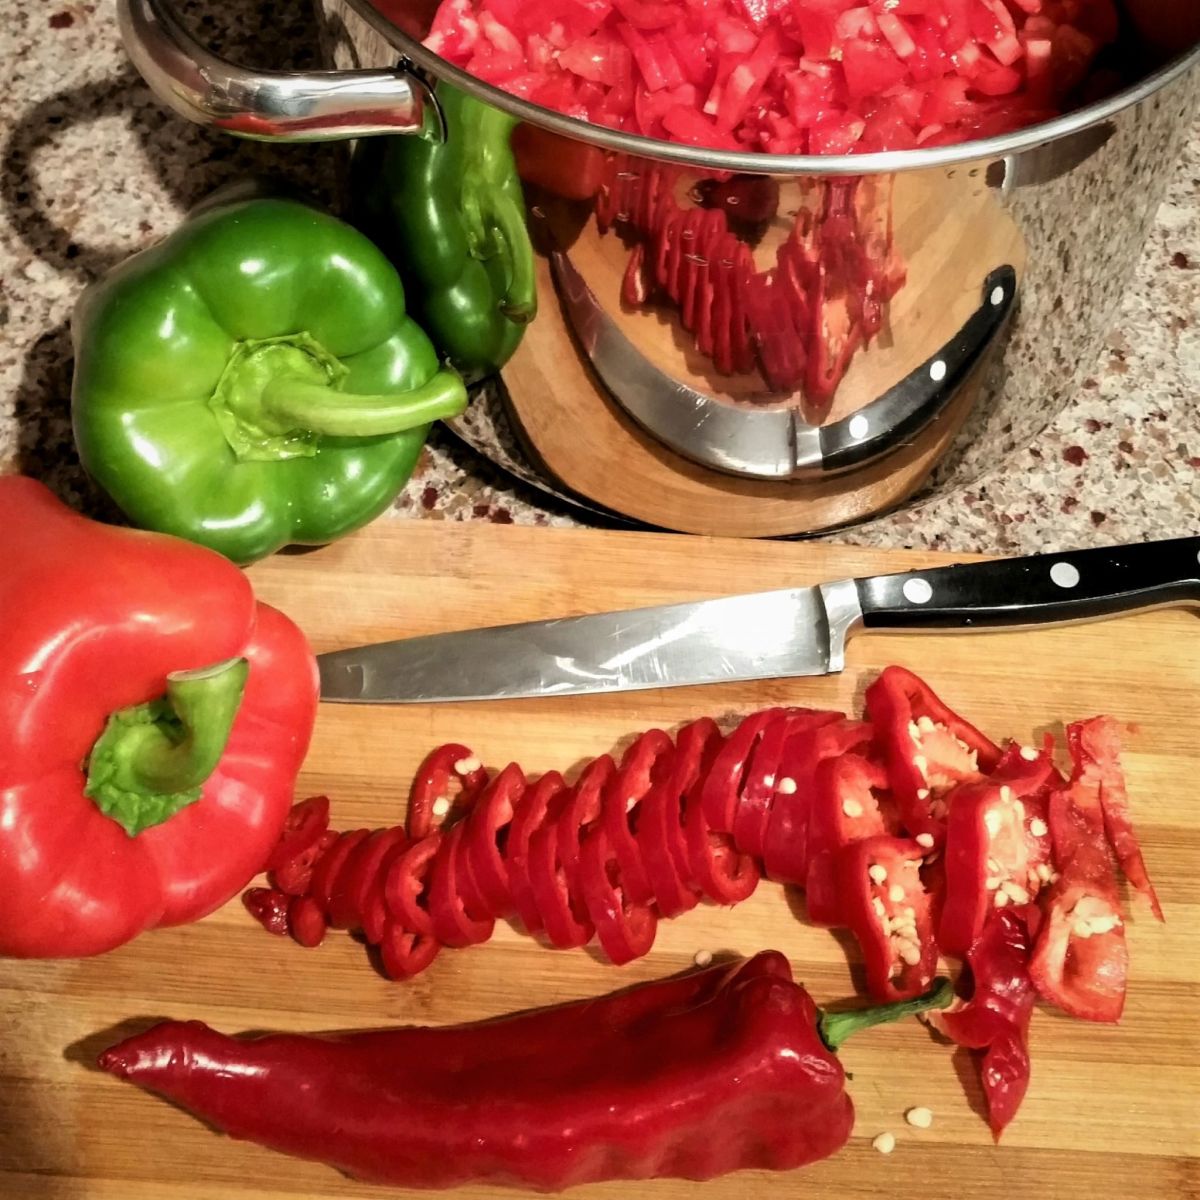 Use chopped over-ripe tomatoes for your chili. This way you can use less processed tomato sauce.